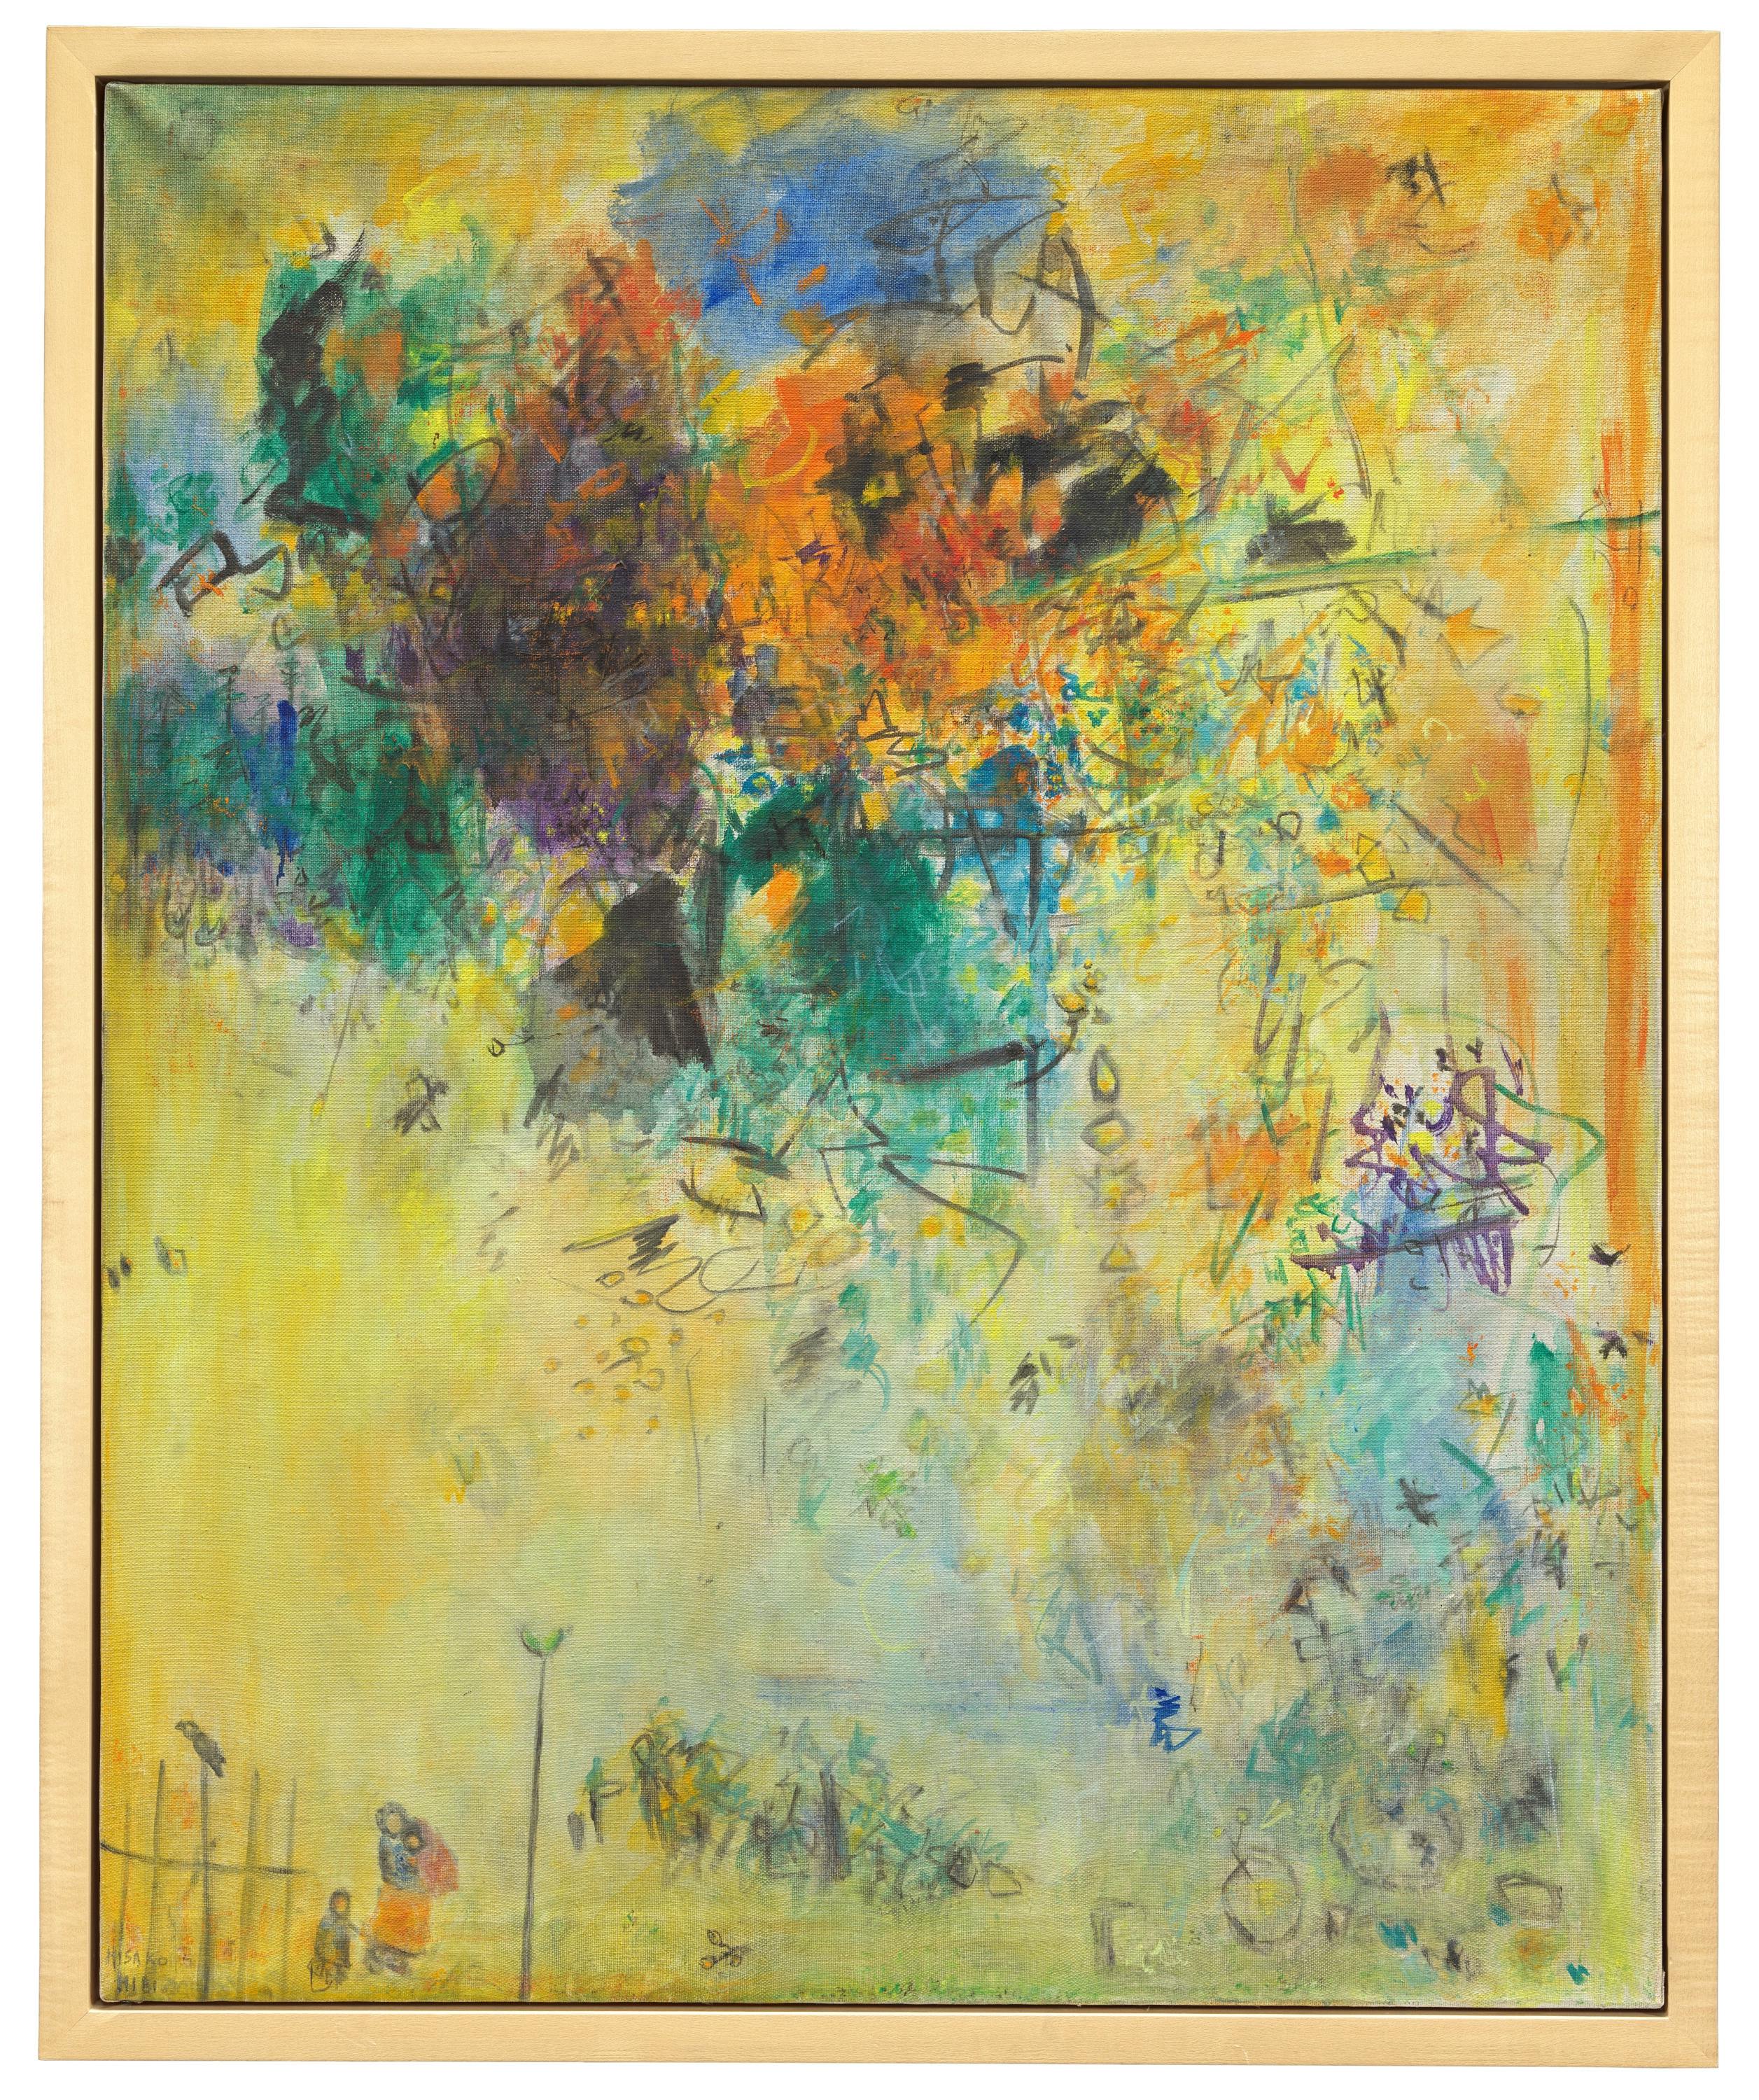 An abstract painting featuring vibrant yellow, green, and blue colors